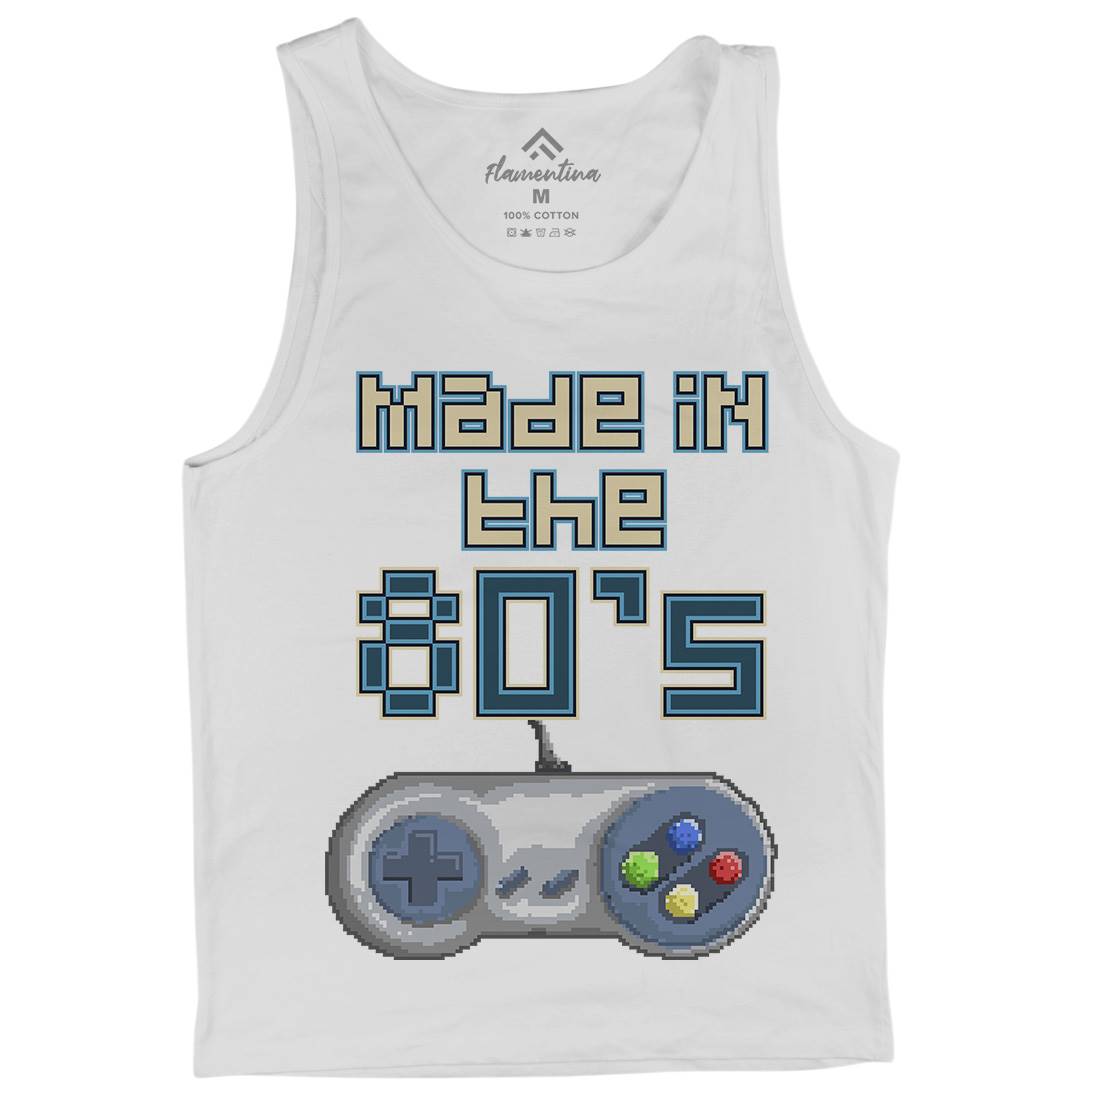 Made In Thes Mens Tank Top Vest Geek B929